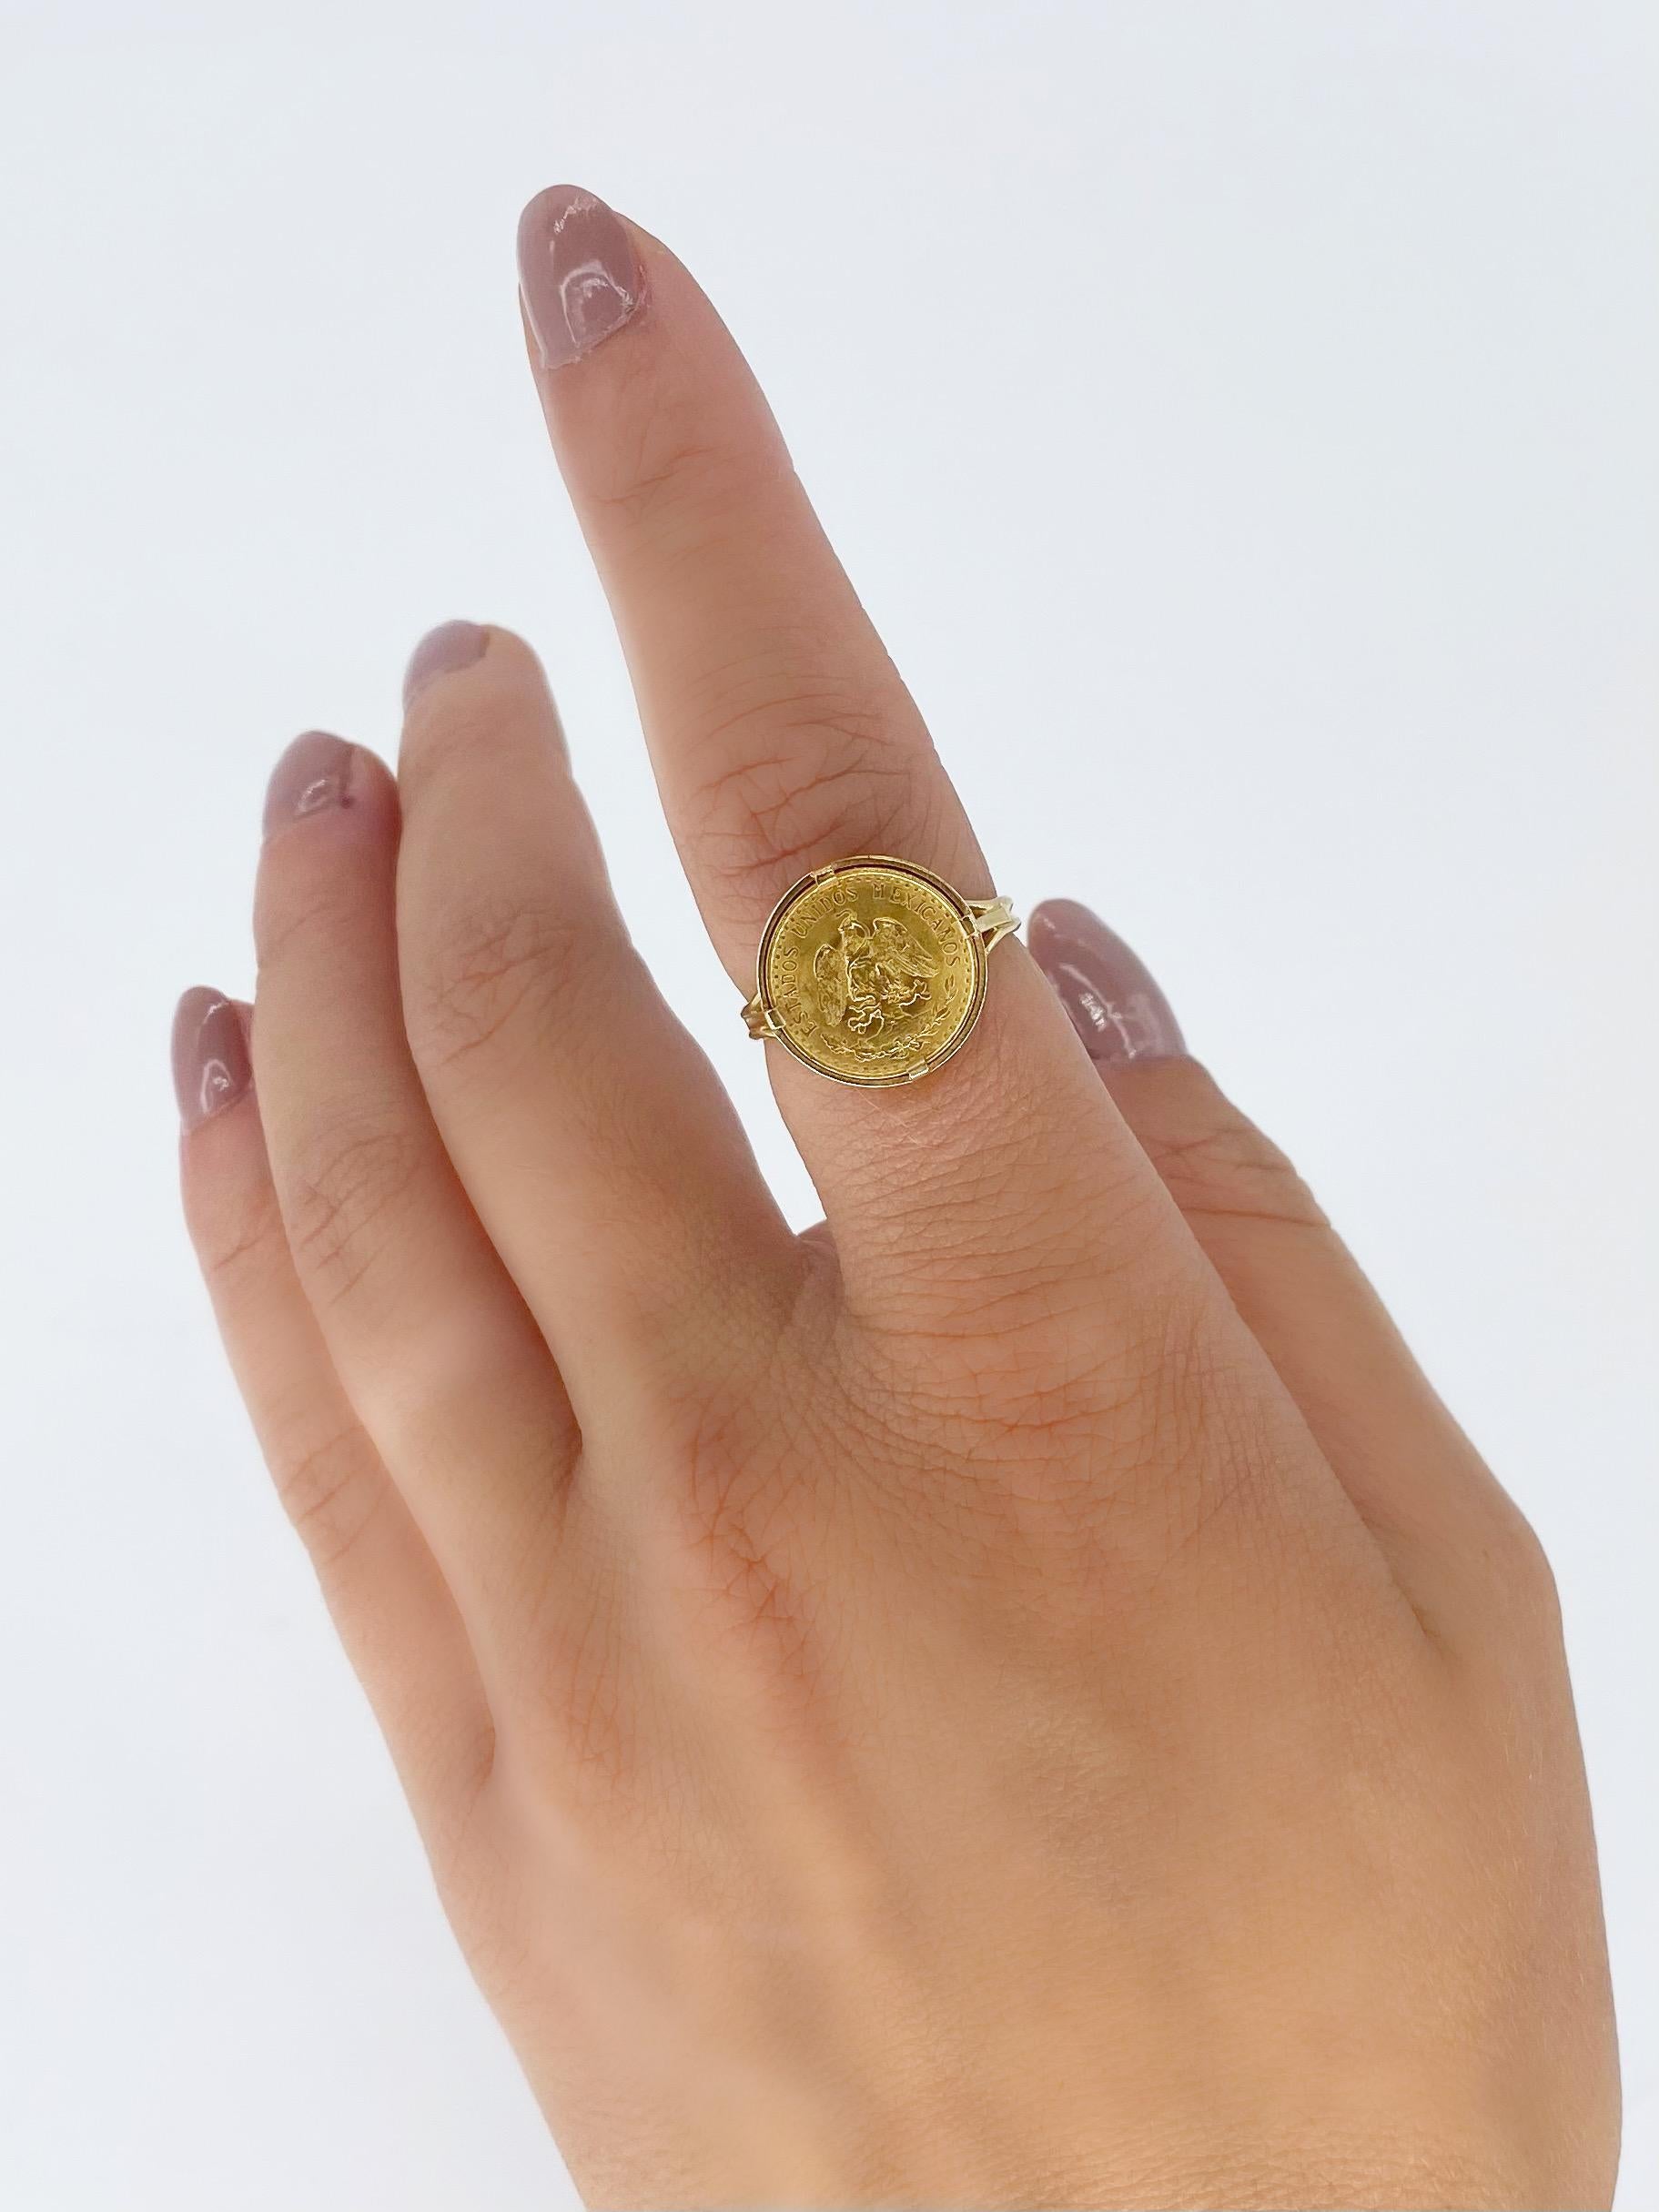 Discover our remarkable 18k solid gold ring, a unique piece of jewelry that combines the timeless elegance of gold with the fascinating numismatic history of Mexico.

The Dos Pesos Mexicanos coin, dated 1945 and depicting the national eagle emblem